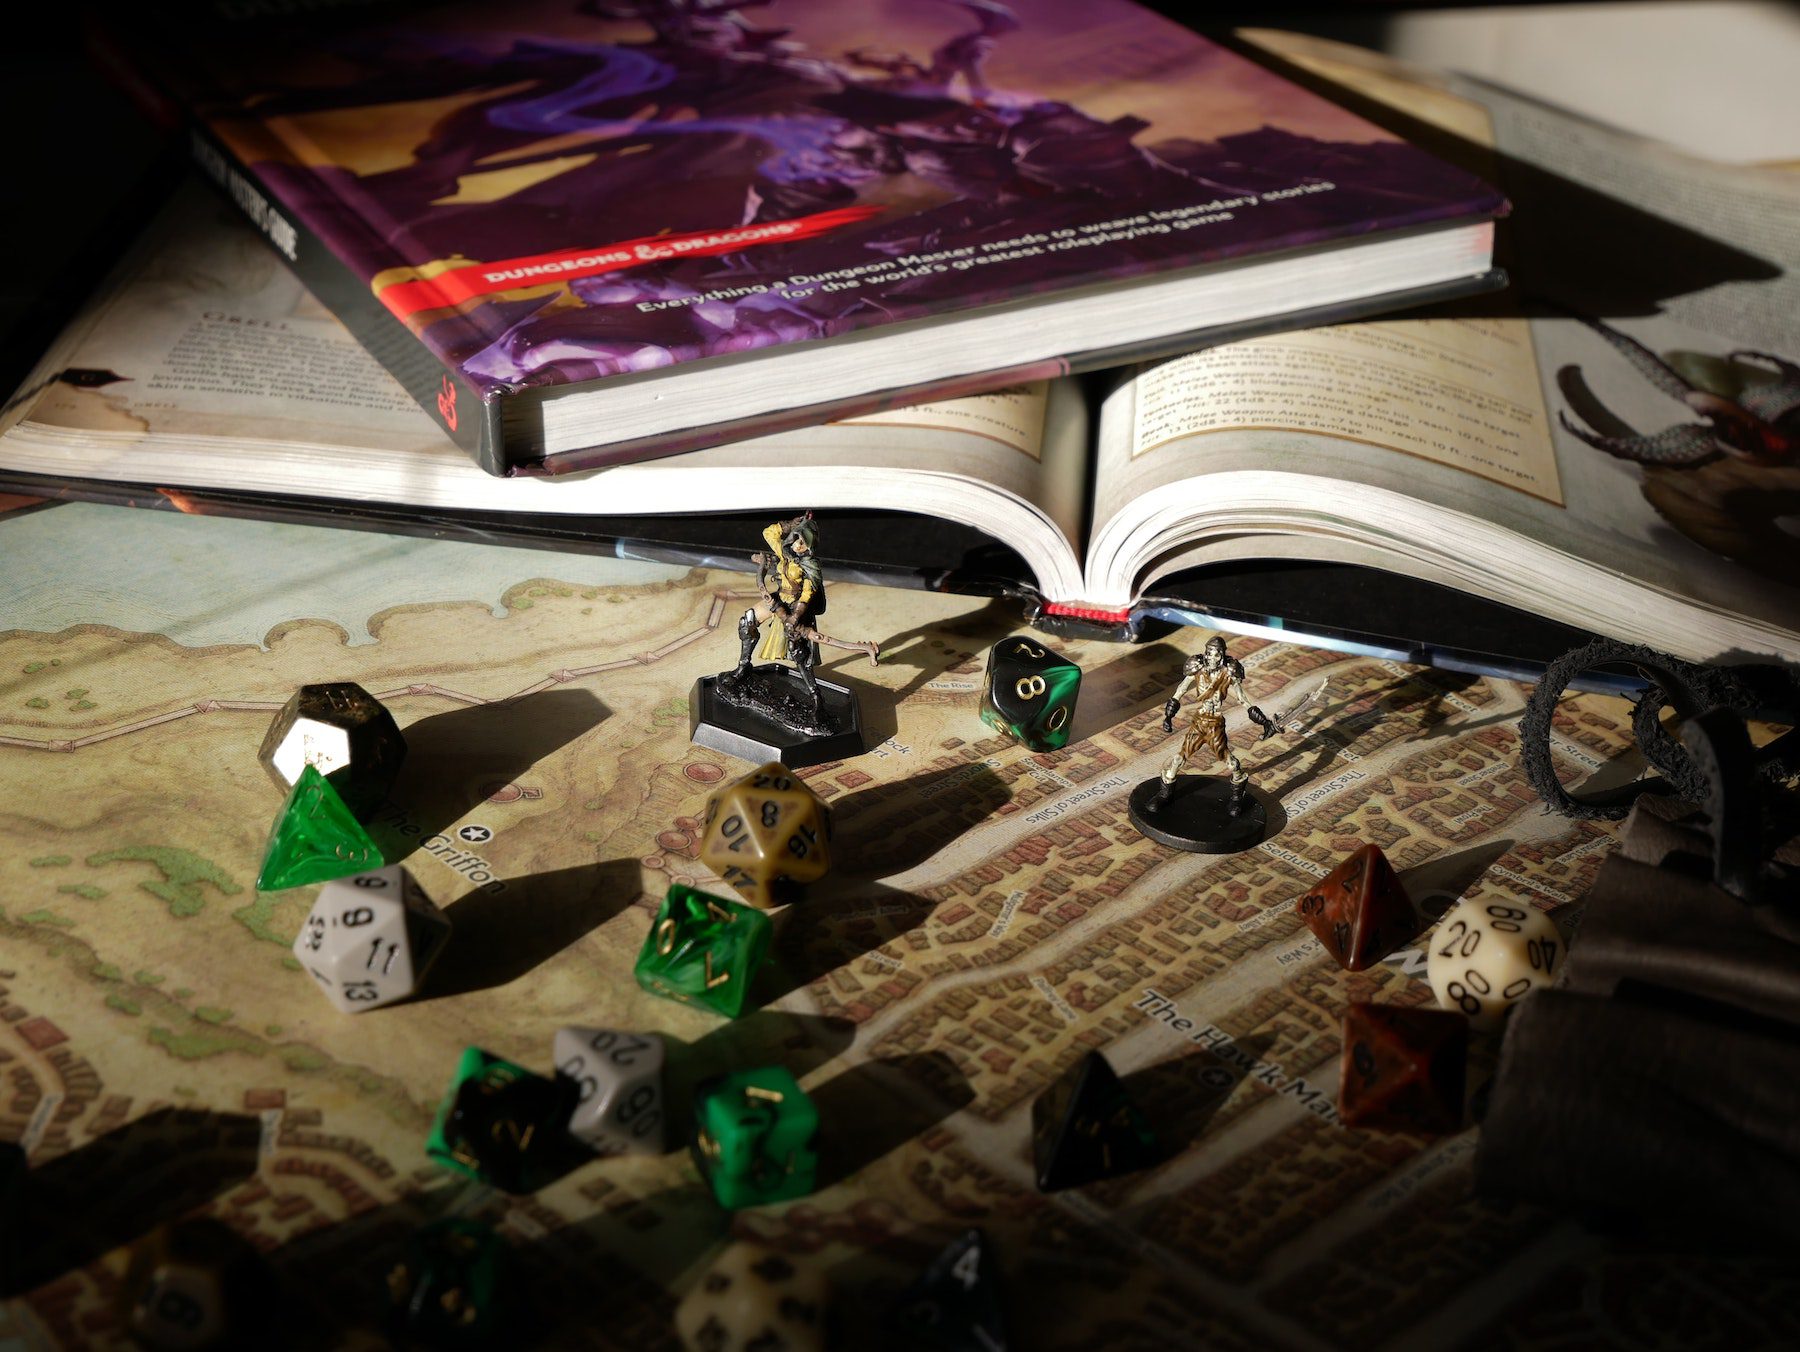 Several D20 dice scattered on a tabletop near some Dungeons & Dragons guidebooks, all producing heavy shadows from unseen light source.